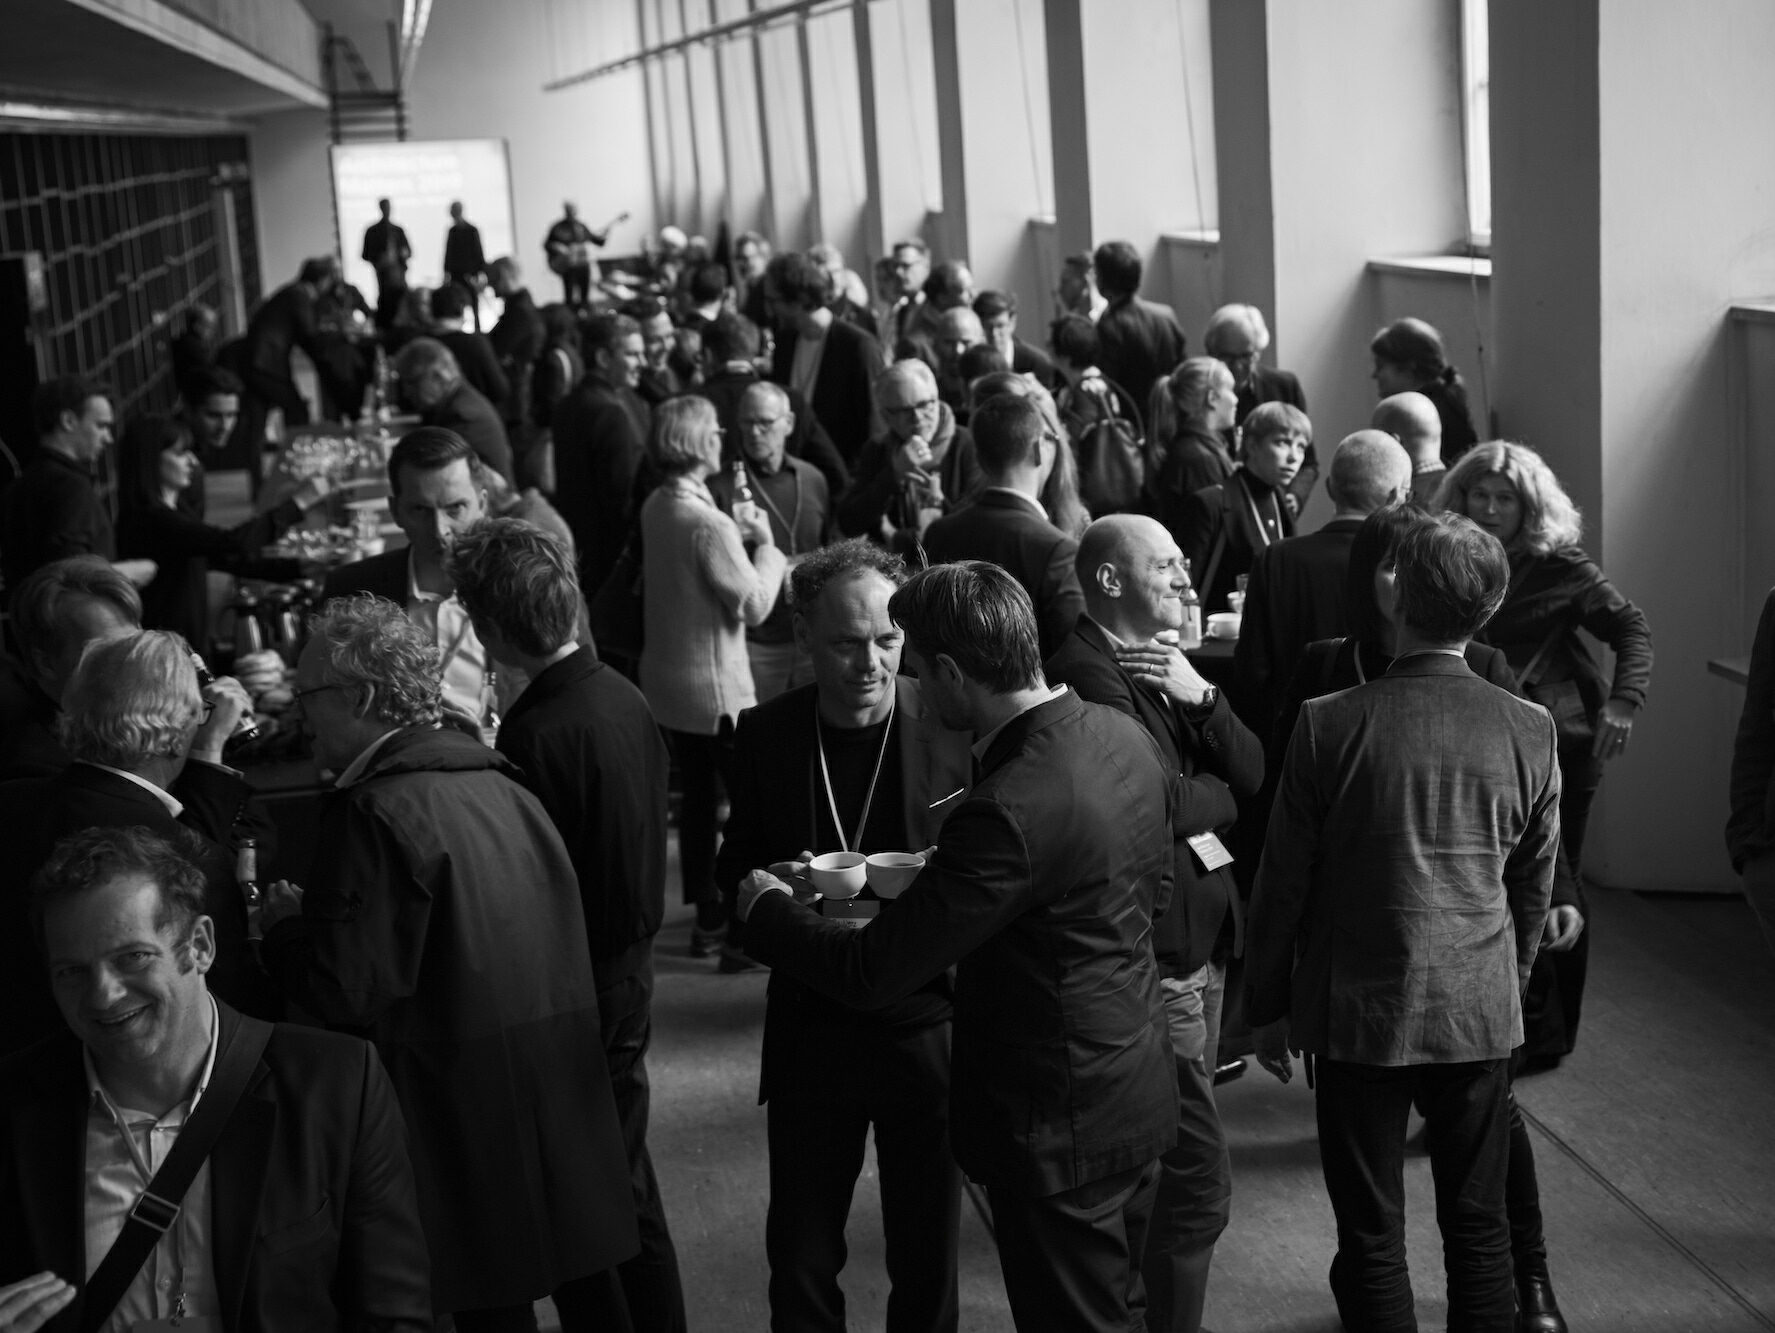 Architecture Matters 2019, conference photo: Tanja Kernweiss